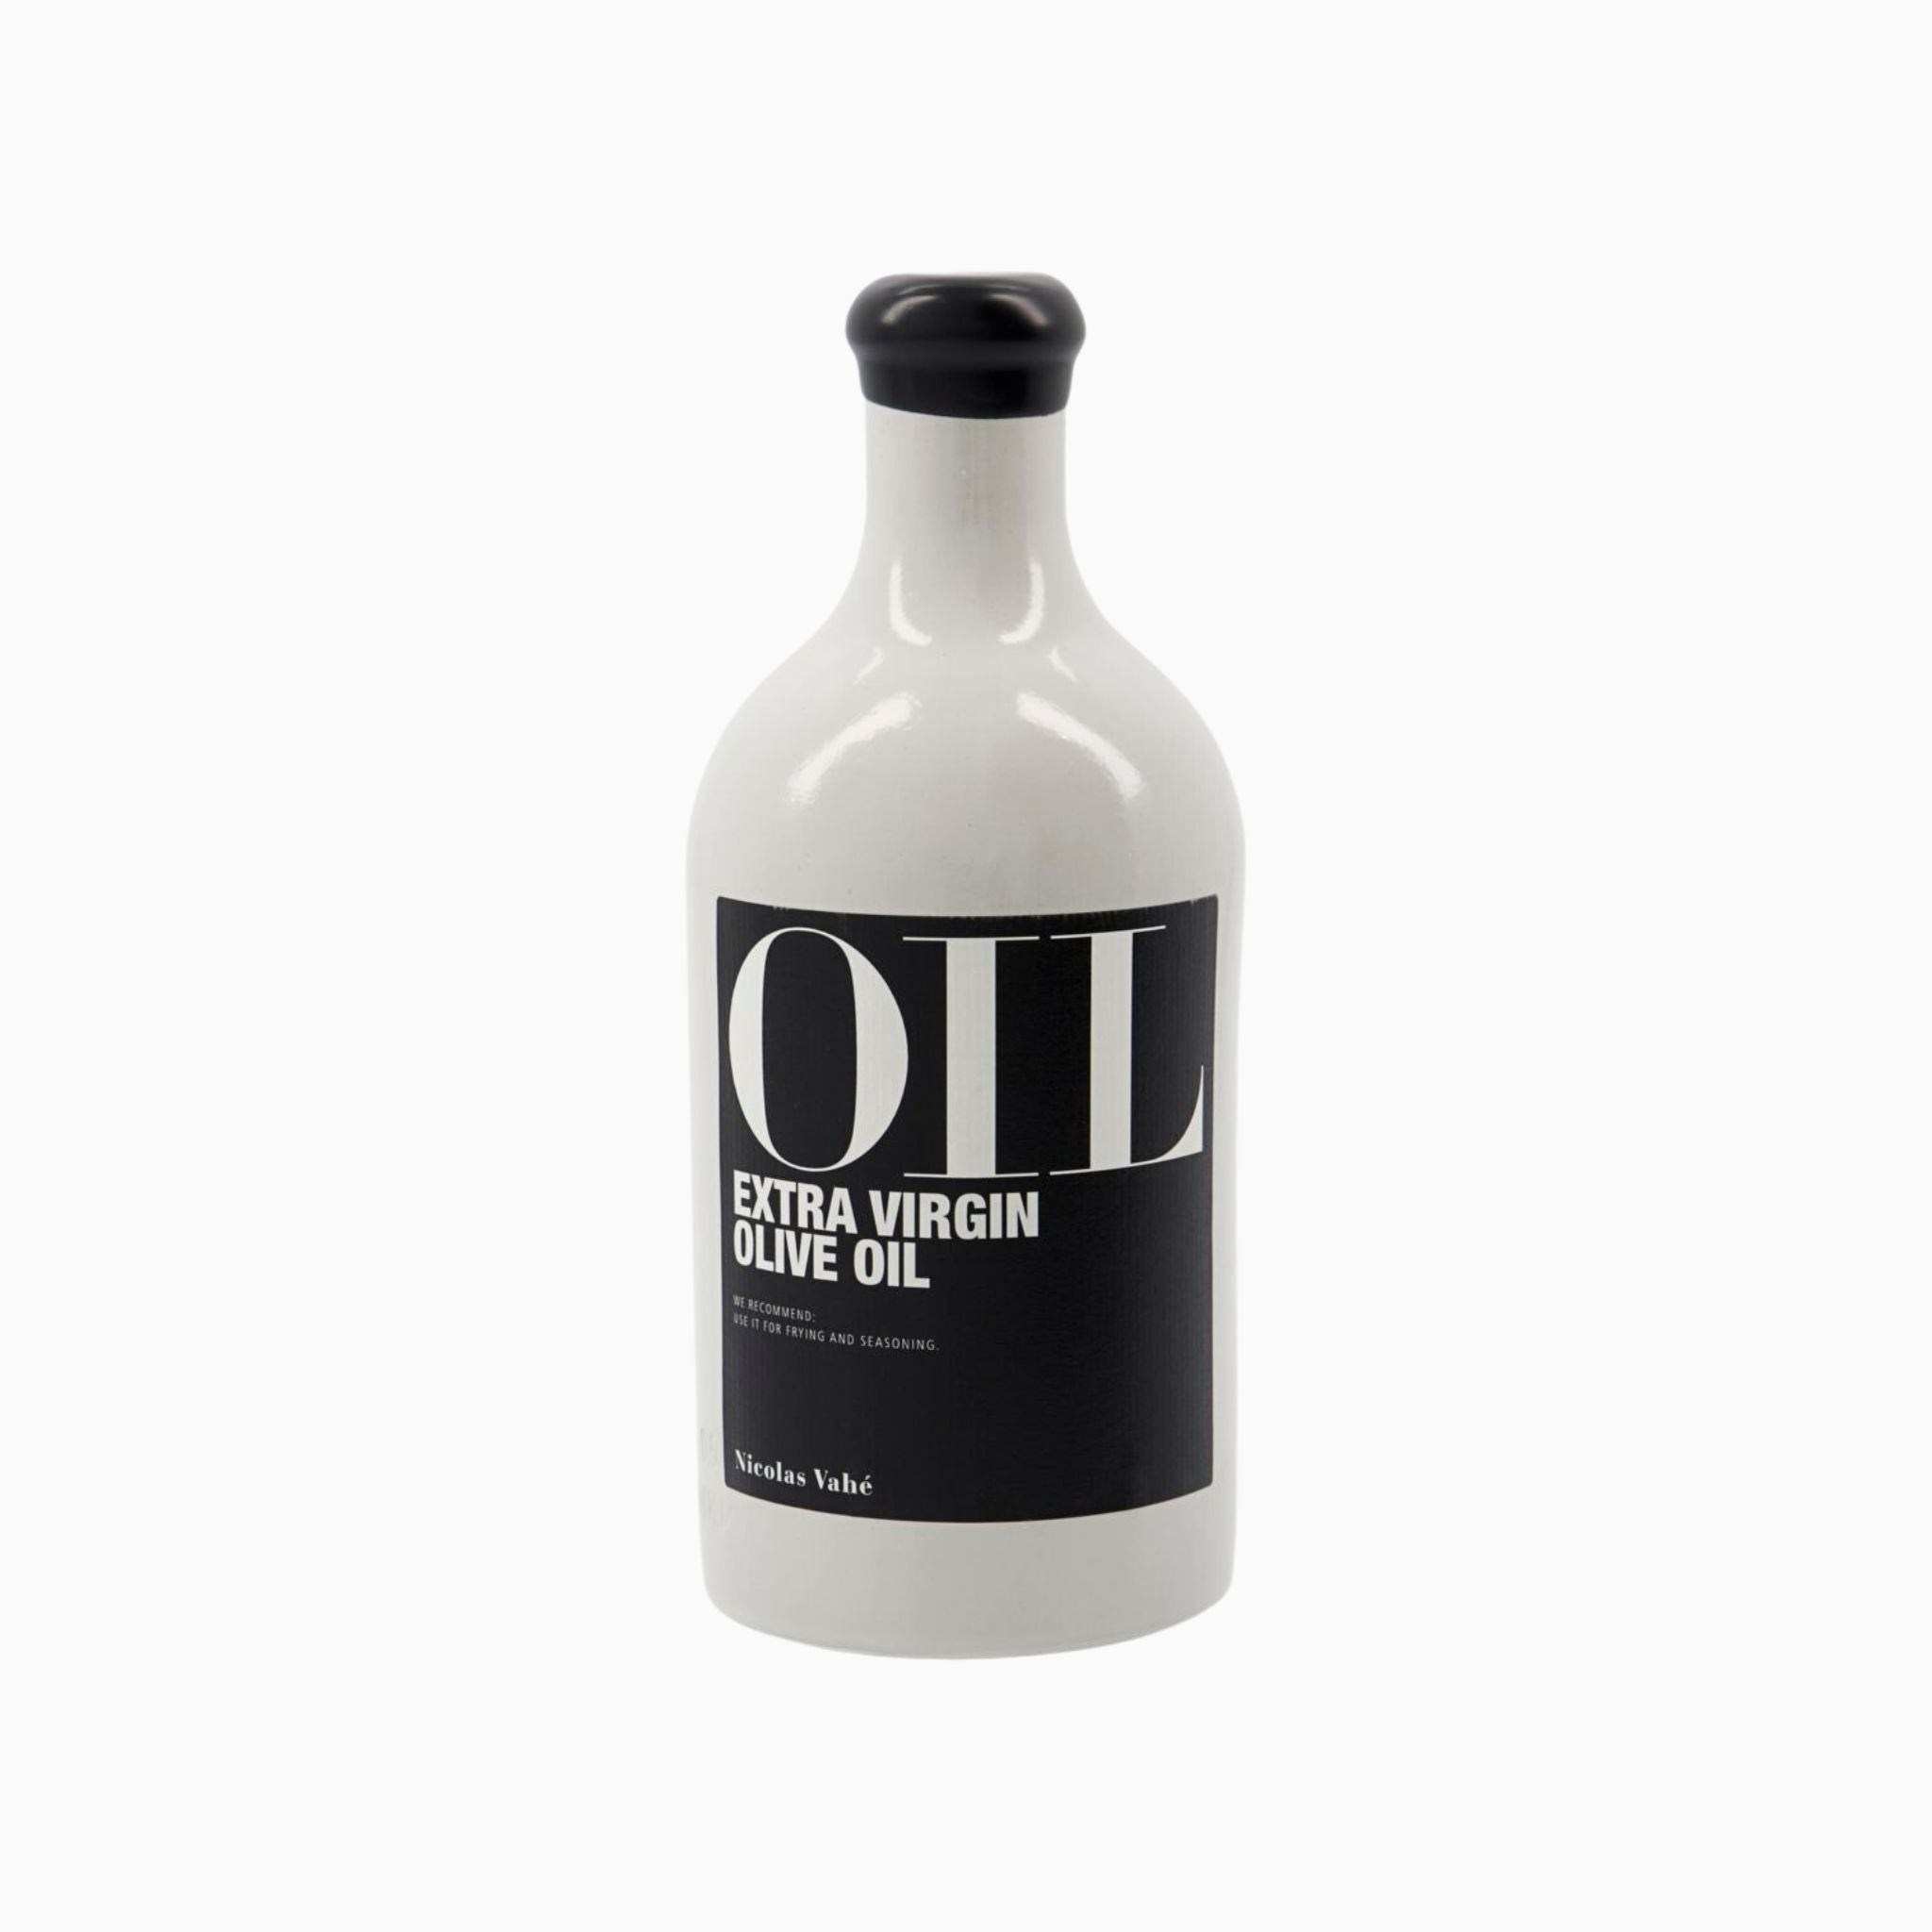 EXTRA VIRGIN OLIVE OIL - Simply Elevated Home Furnishings 